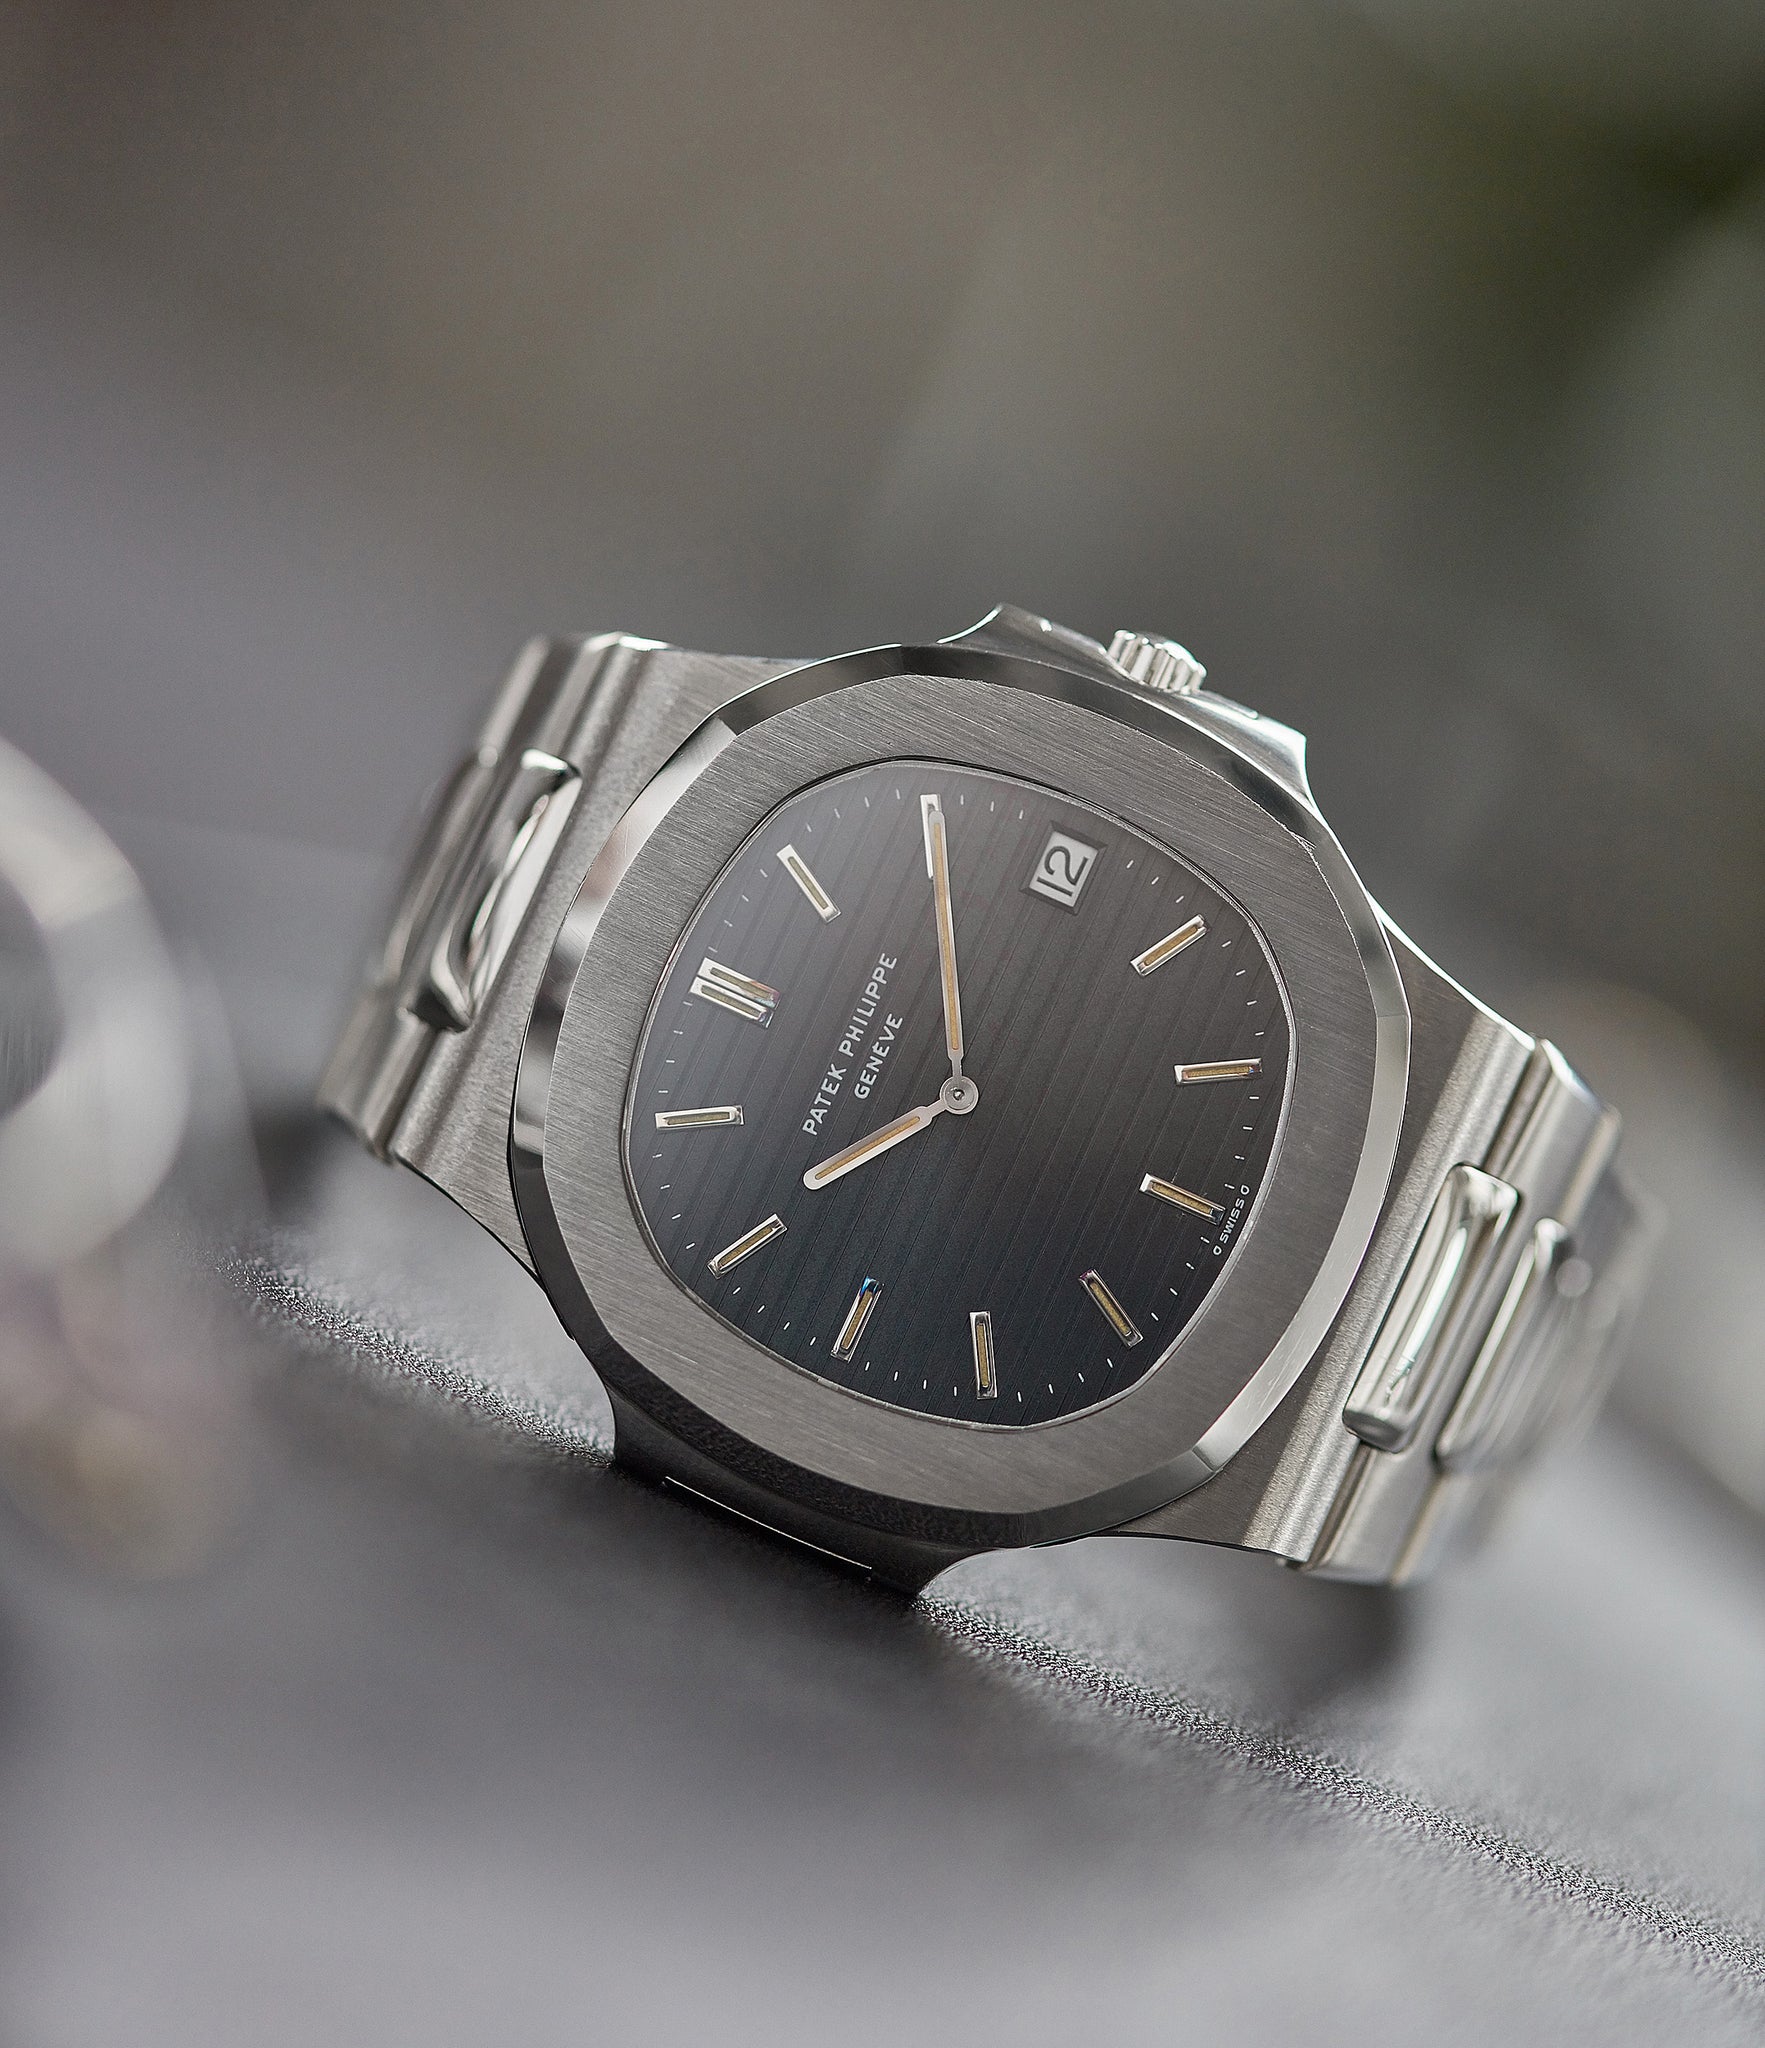 collect vintage Patek Philippe Nautilus 3700/001 full set sport watch for sale online at A Collected Man London UK specialist of rare watches